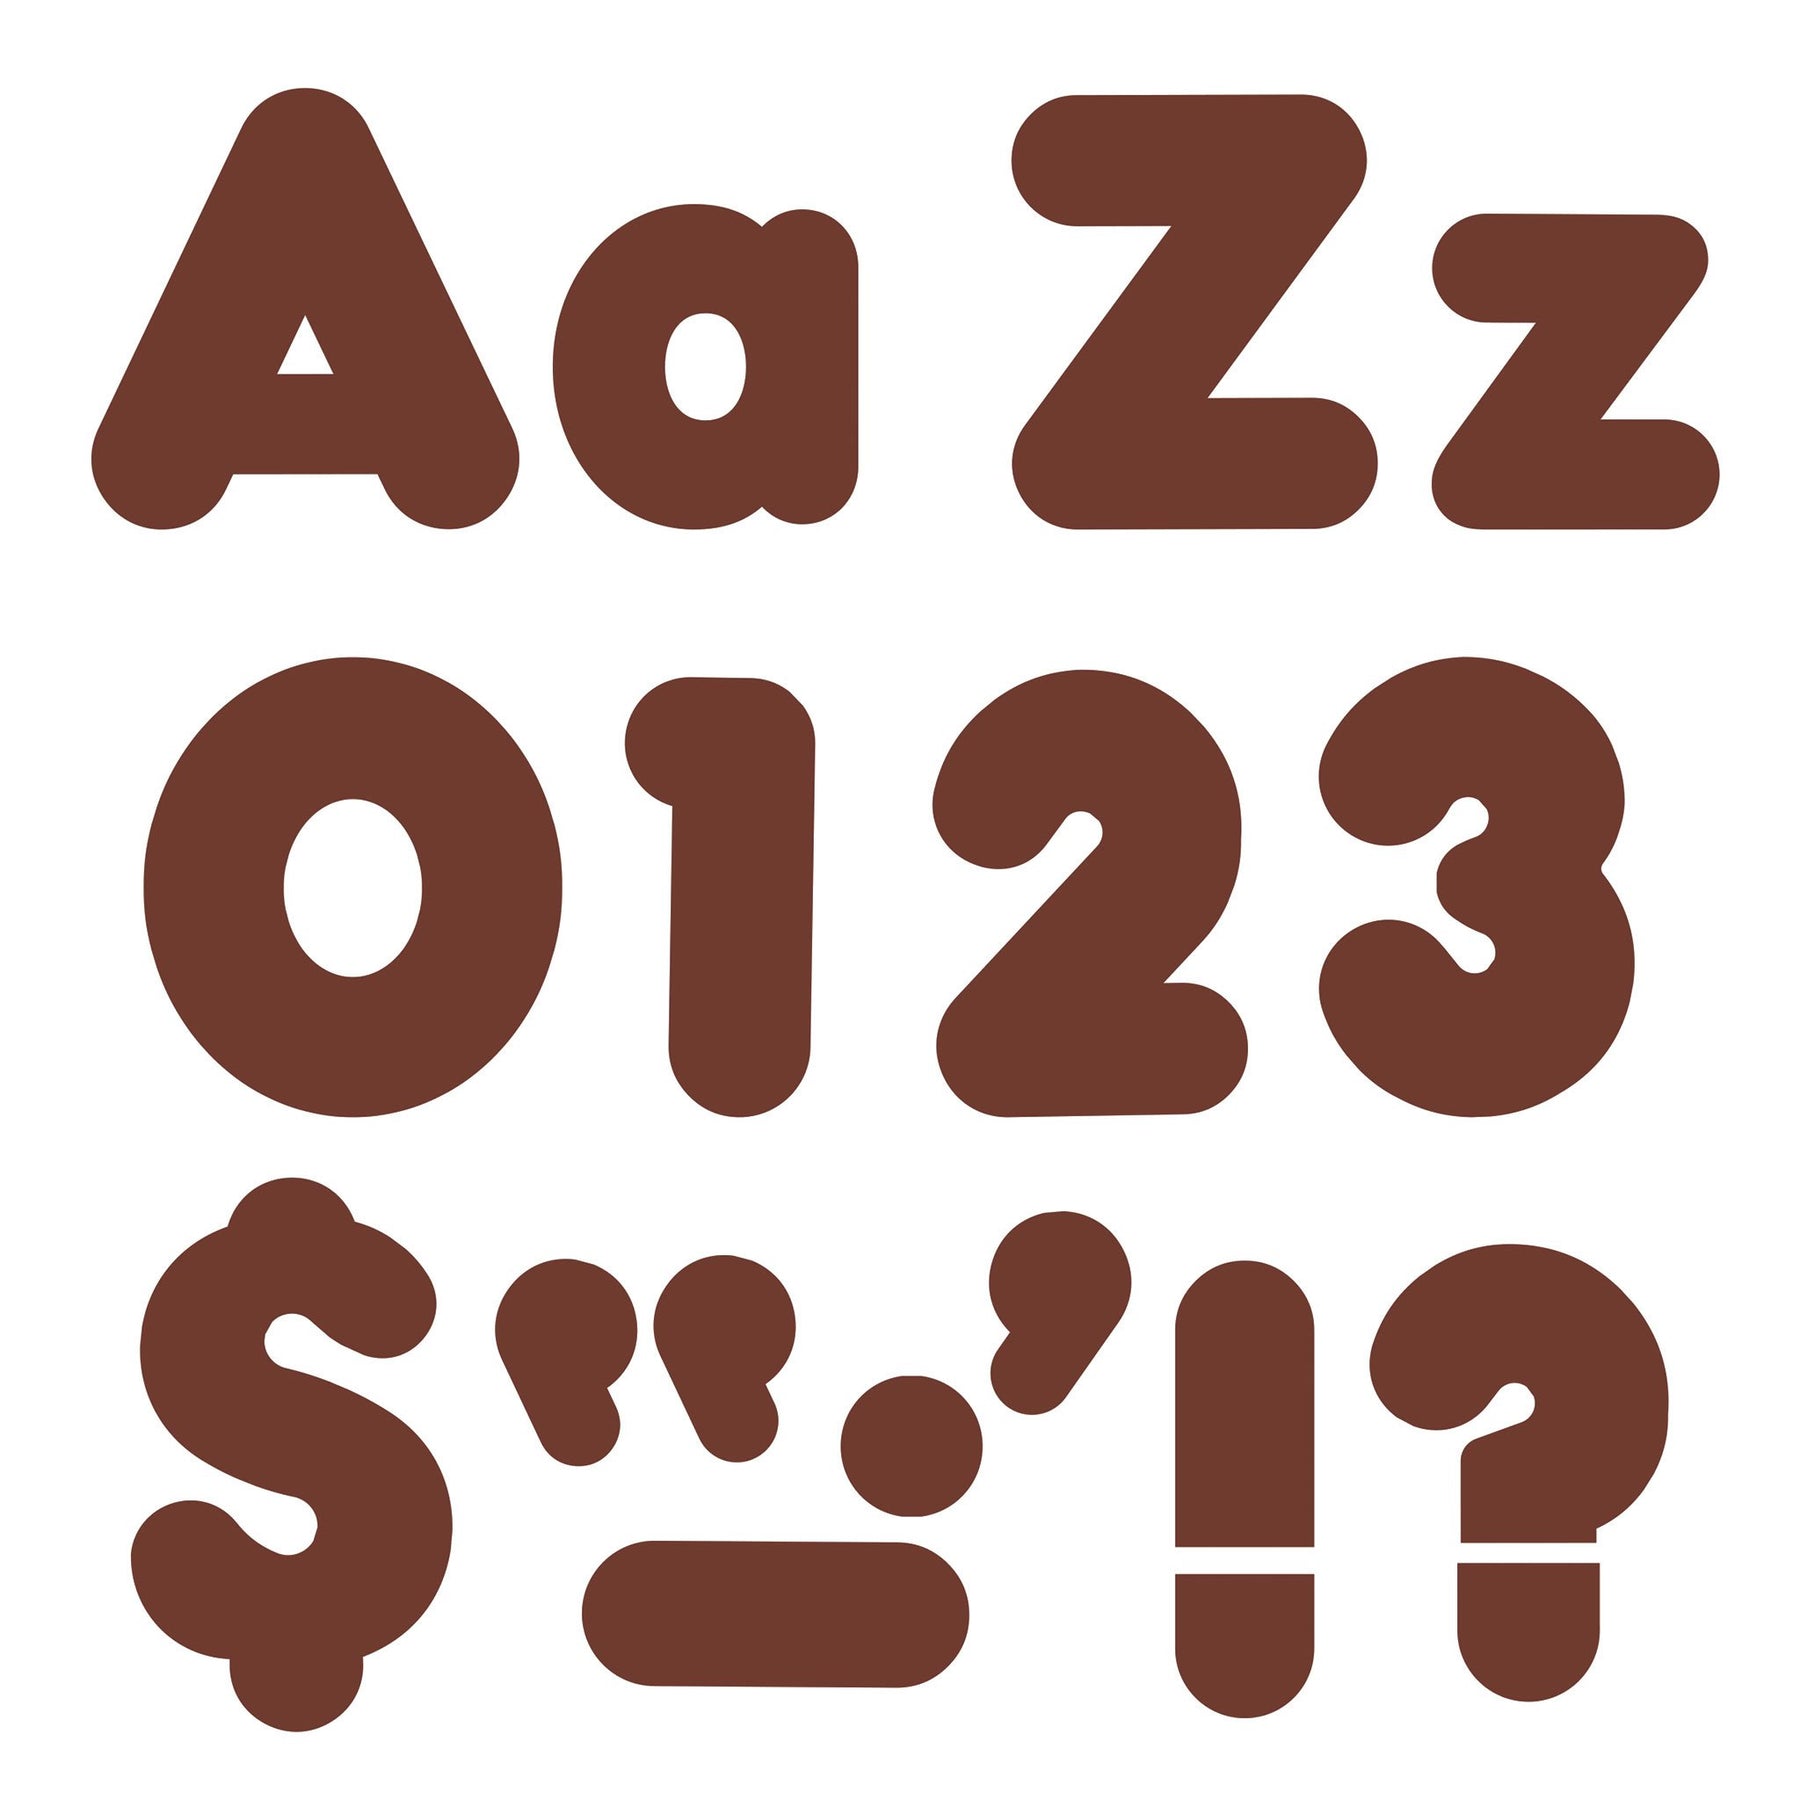 Chocolate Letters and Numbers - Products